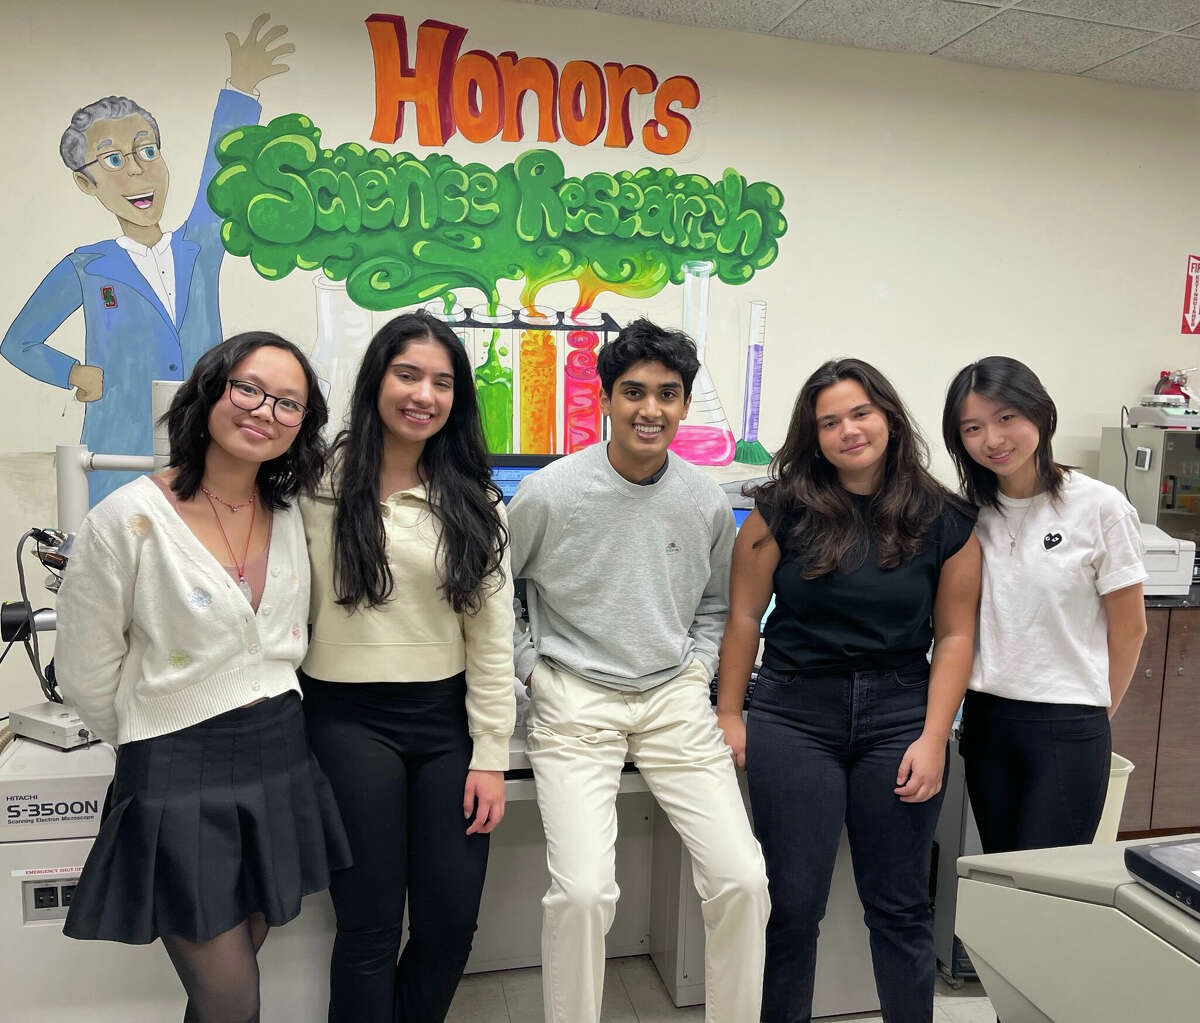 Greenwich High School Regeneron scholars are (from left) Angelina Fogarty, Ambika Grover, Ronit Gupta, Isabella Gega and Stephanie Chang.